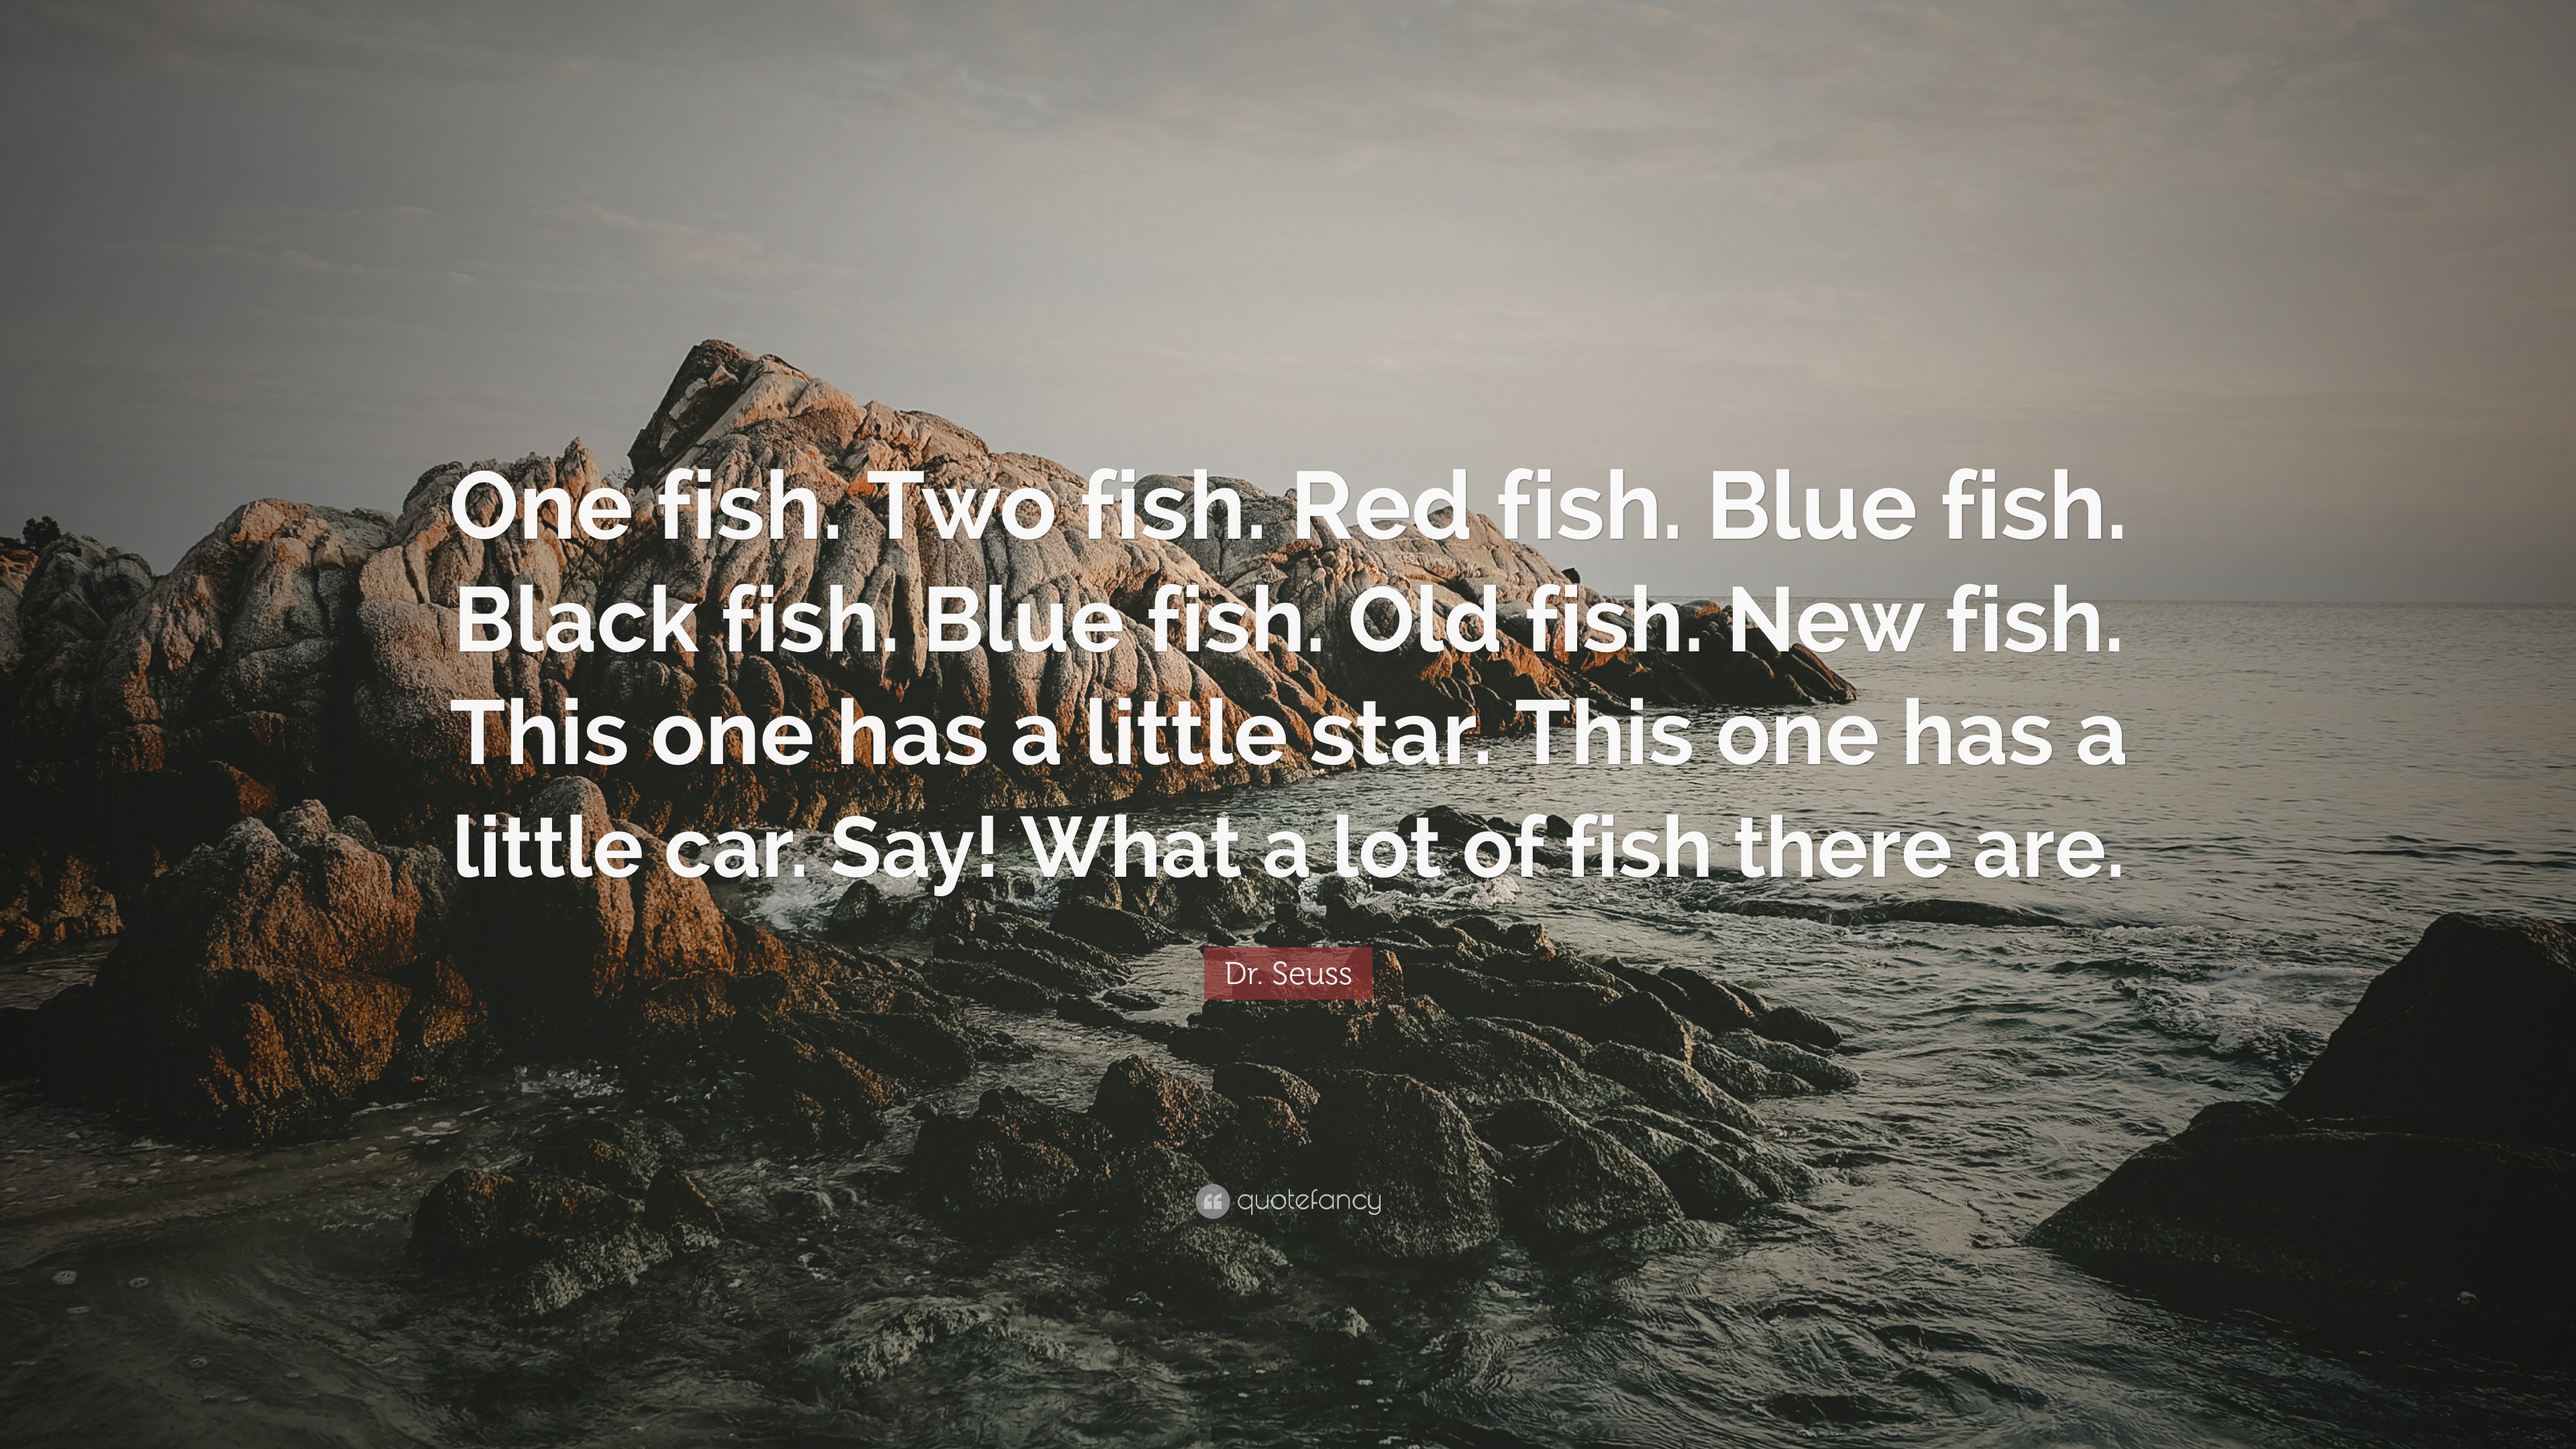 Dr. Seuss Quote: “One fish. Two fish. Red fish. Blue fish. Black fish. Blue  fish. Old fish. New fish. This one has a little star. This one”